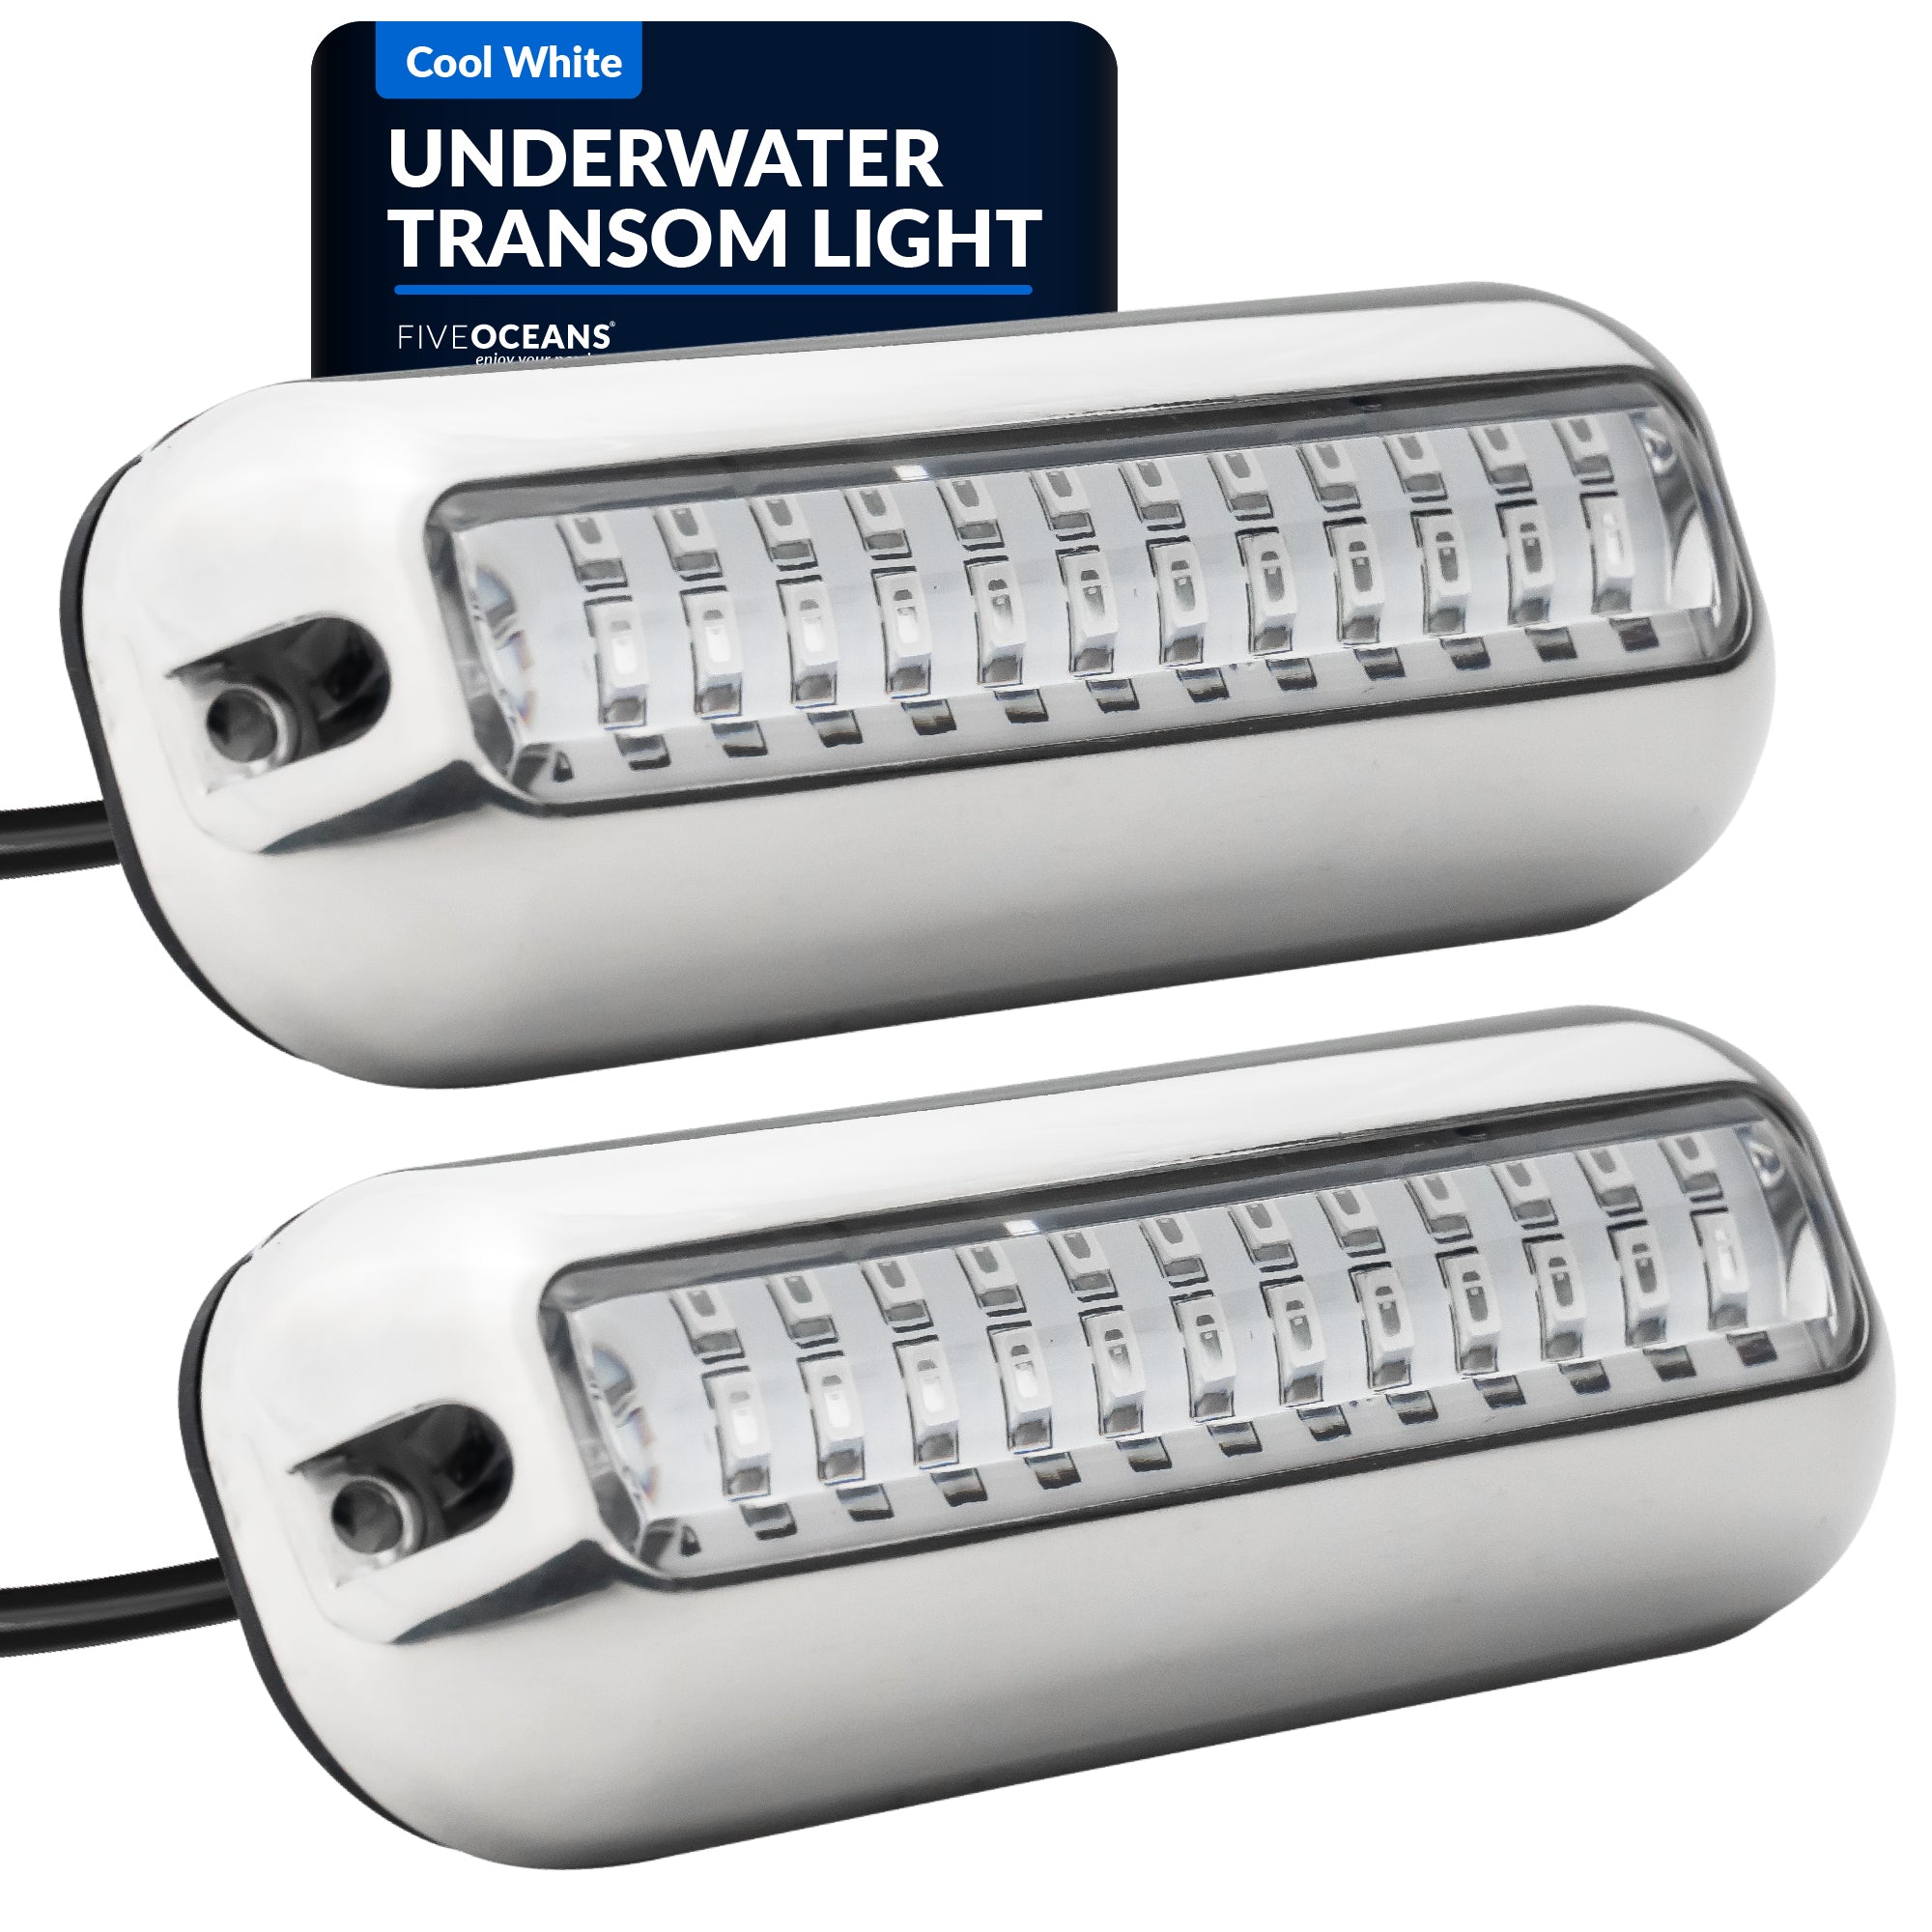 Underwater Transom Light, Stainless Steel, Cool White LED, 2-pack - FO4137-M2